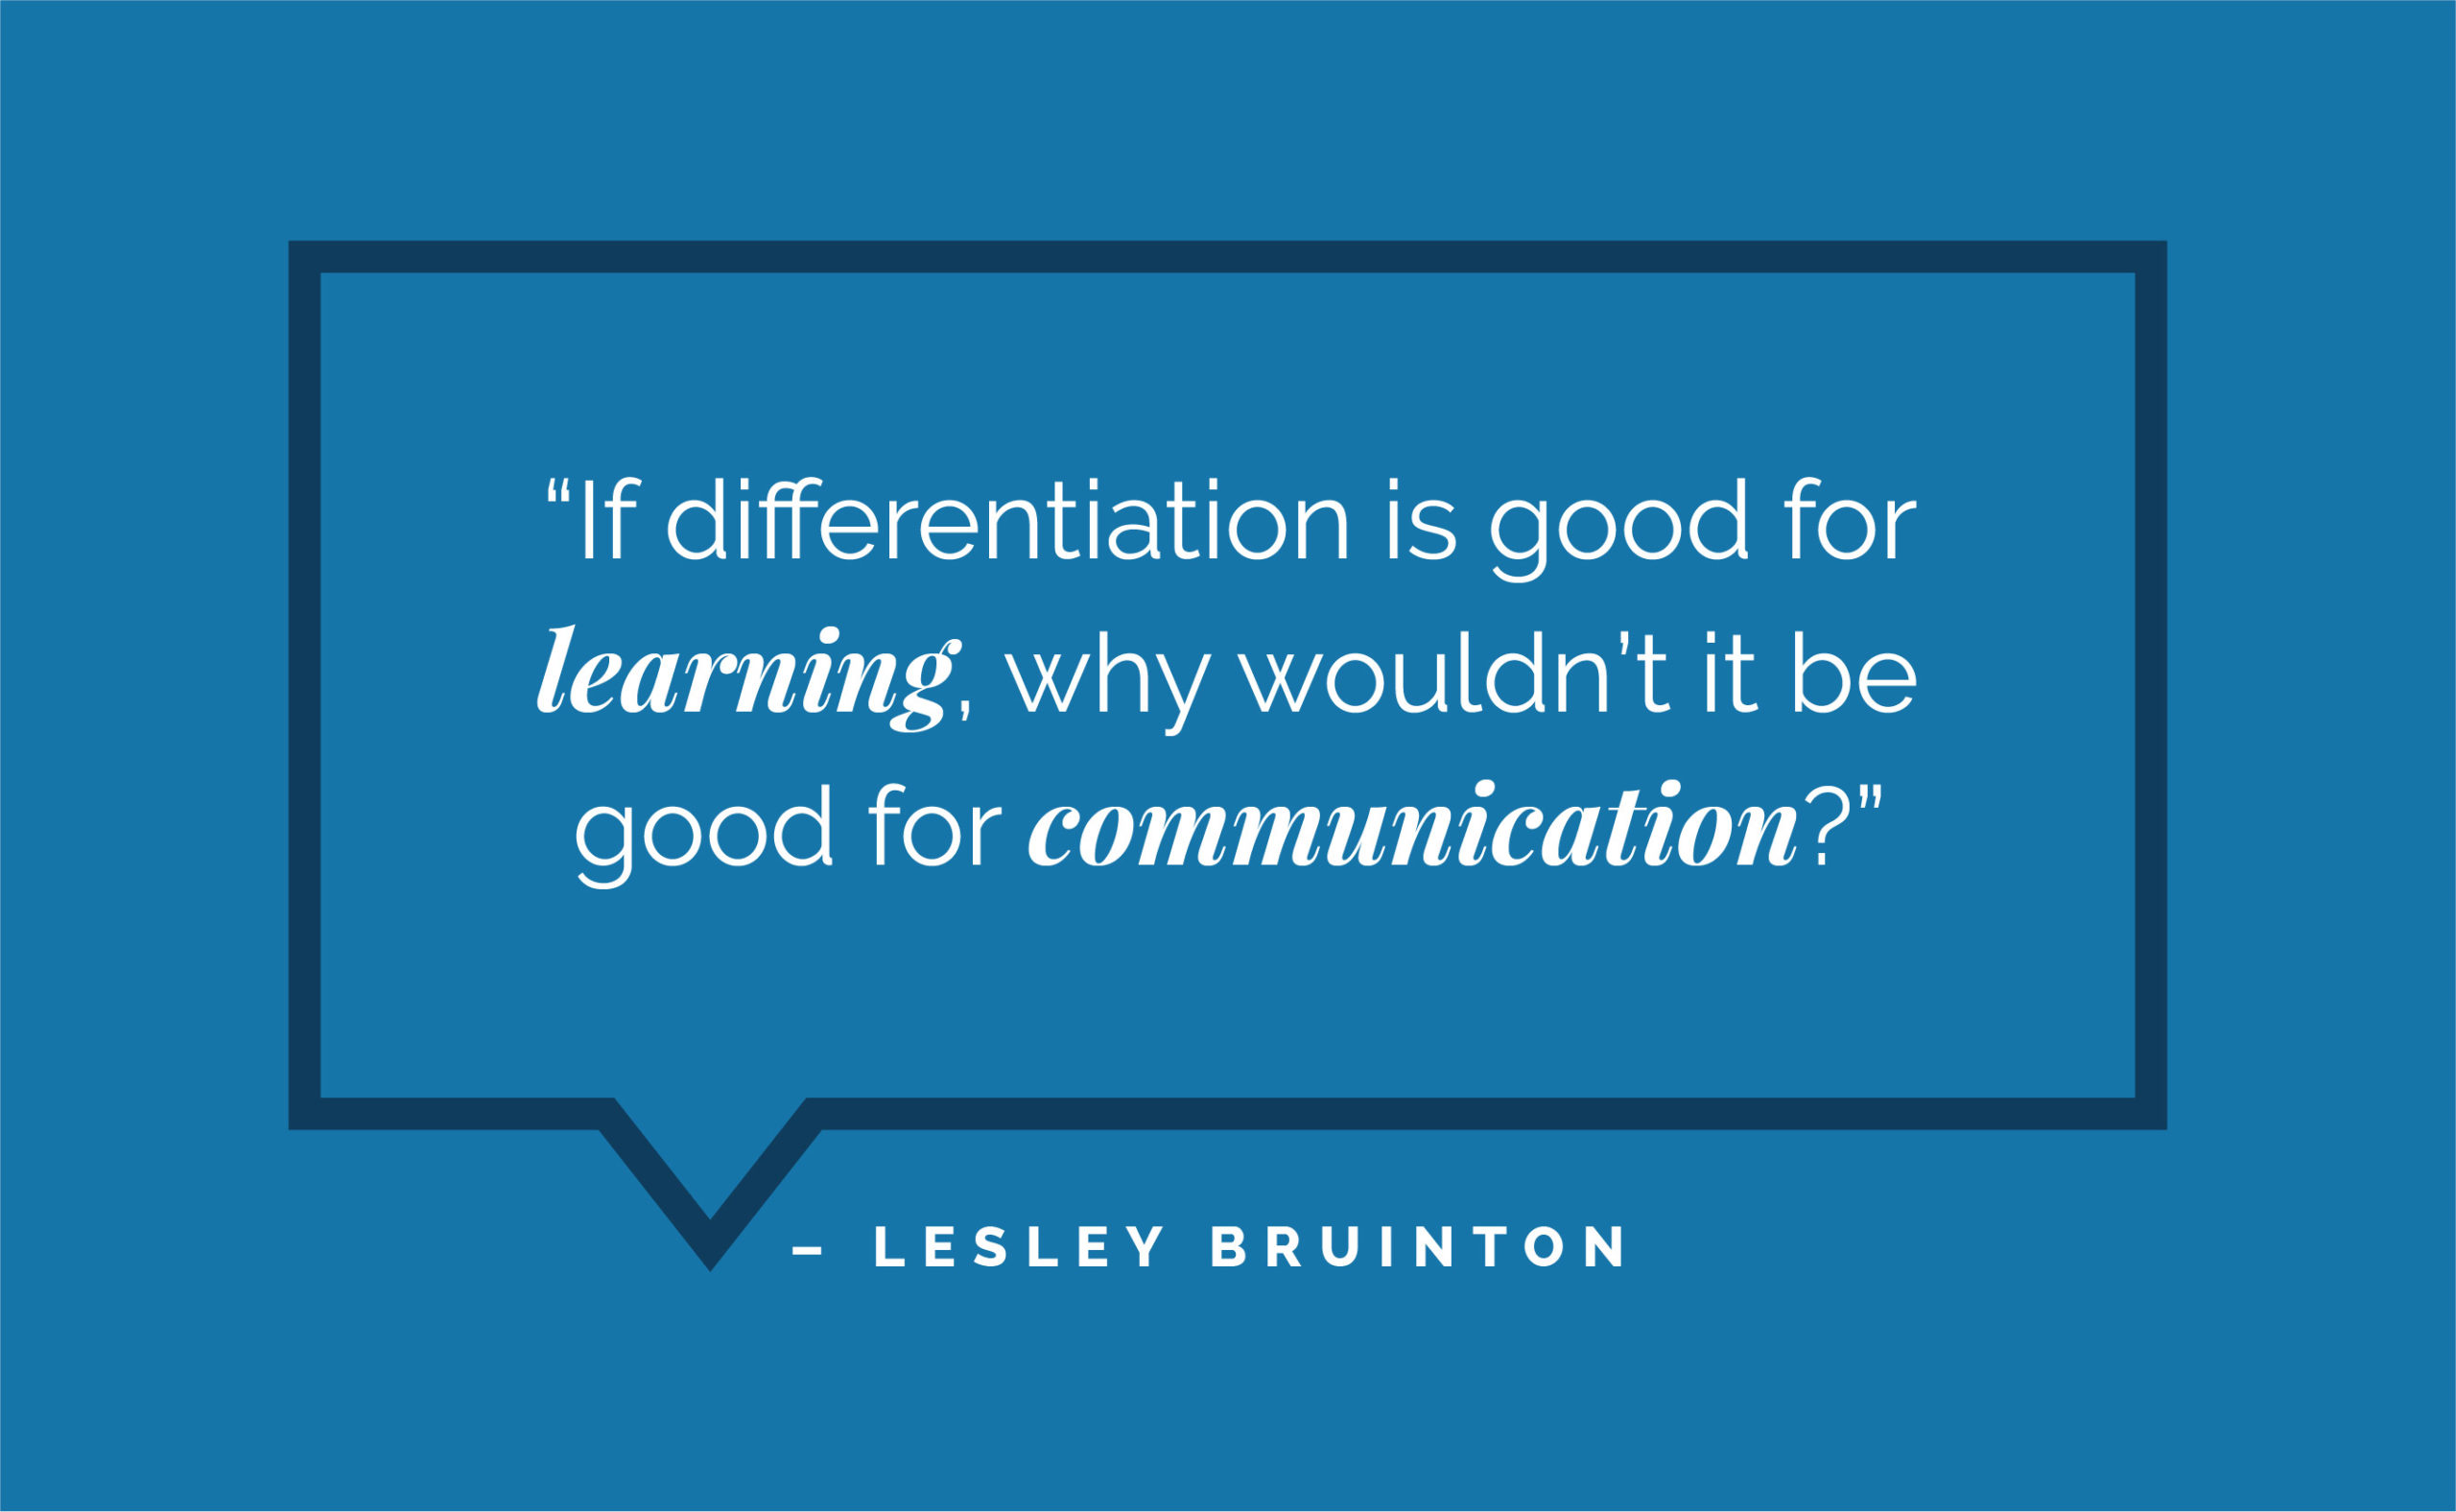 “If differentiation is good for learning, why wouldn’t it be good for communication?” – Lesley Bruinton